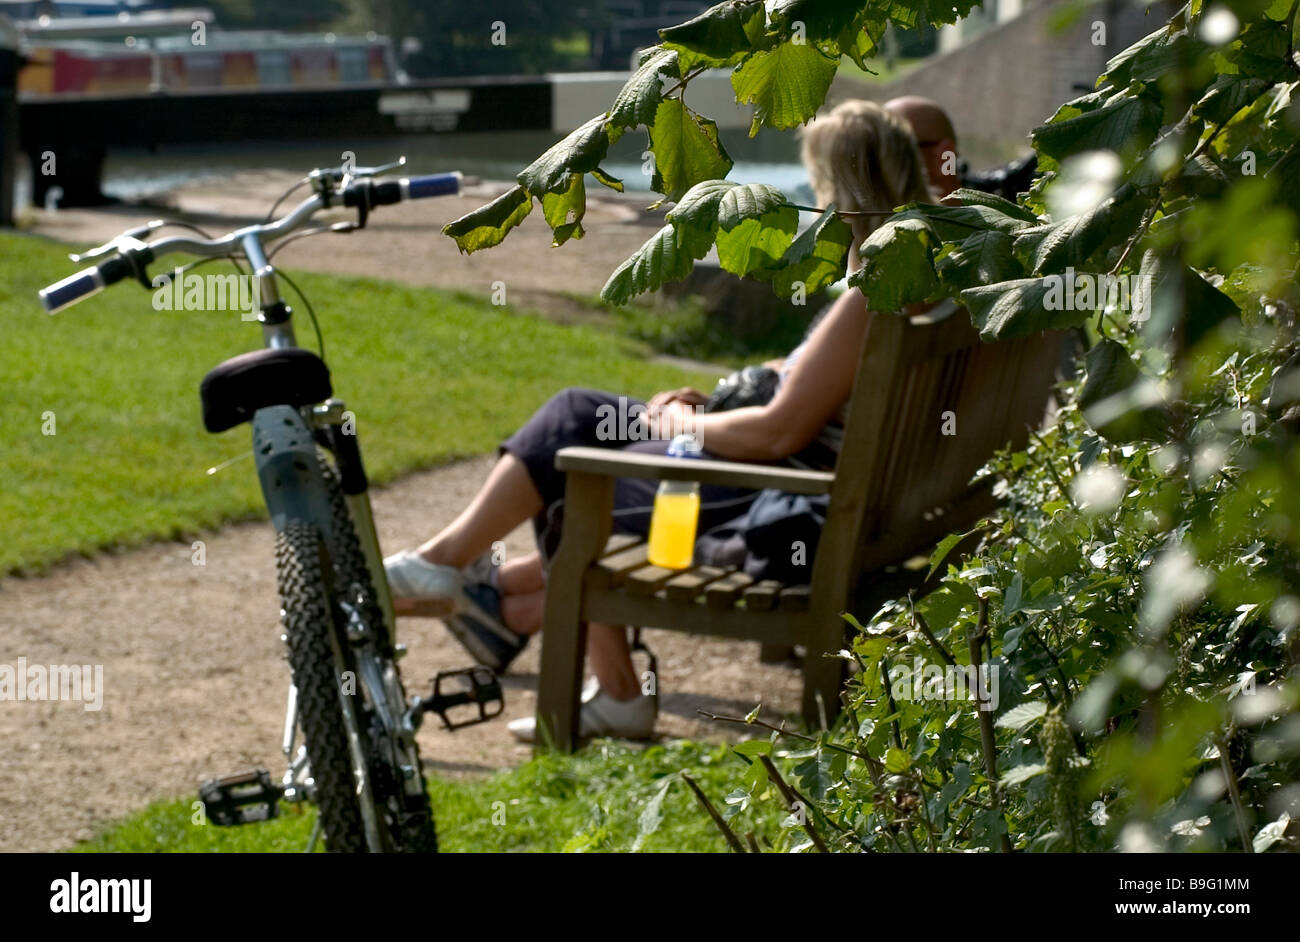 Couple sat on bench on summers day with bike in foreground Stock Photo